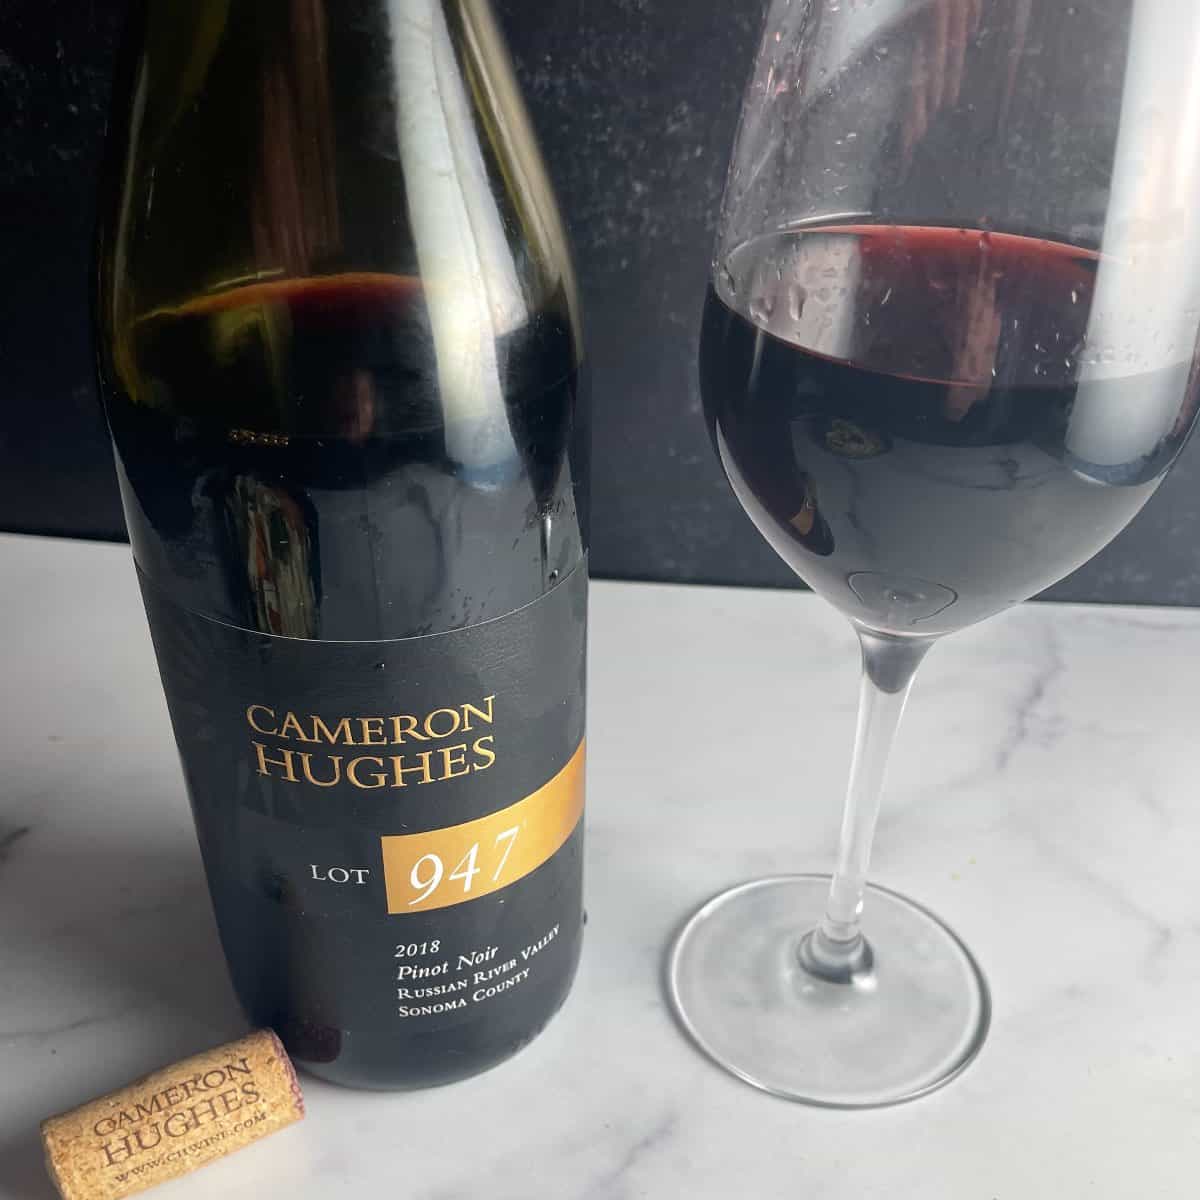 Cameron Hughes Pinot Noir bottle with a glass of the red wine alongside it.